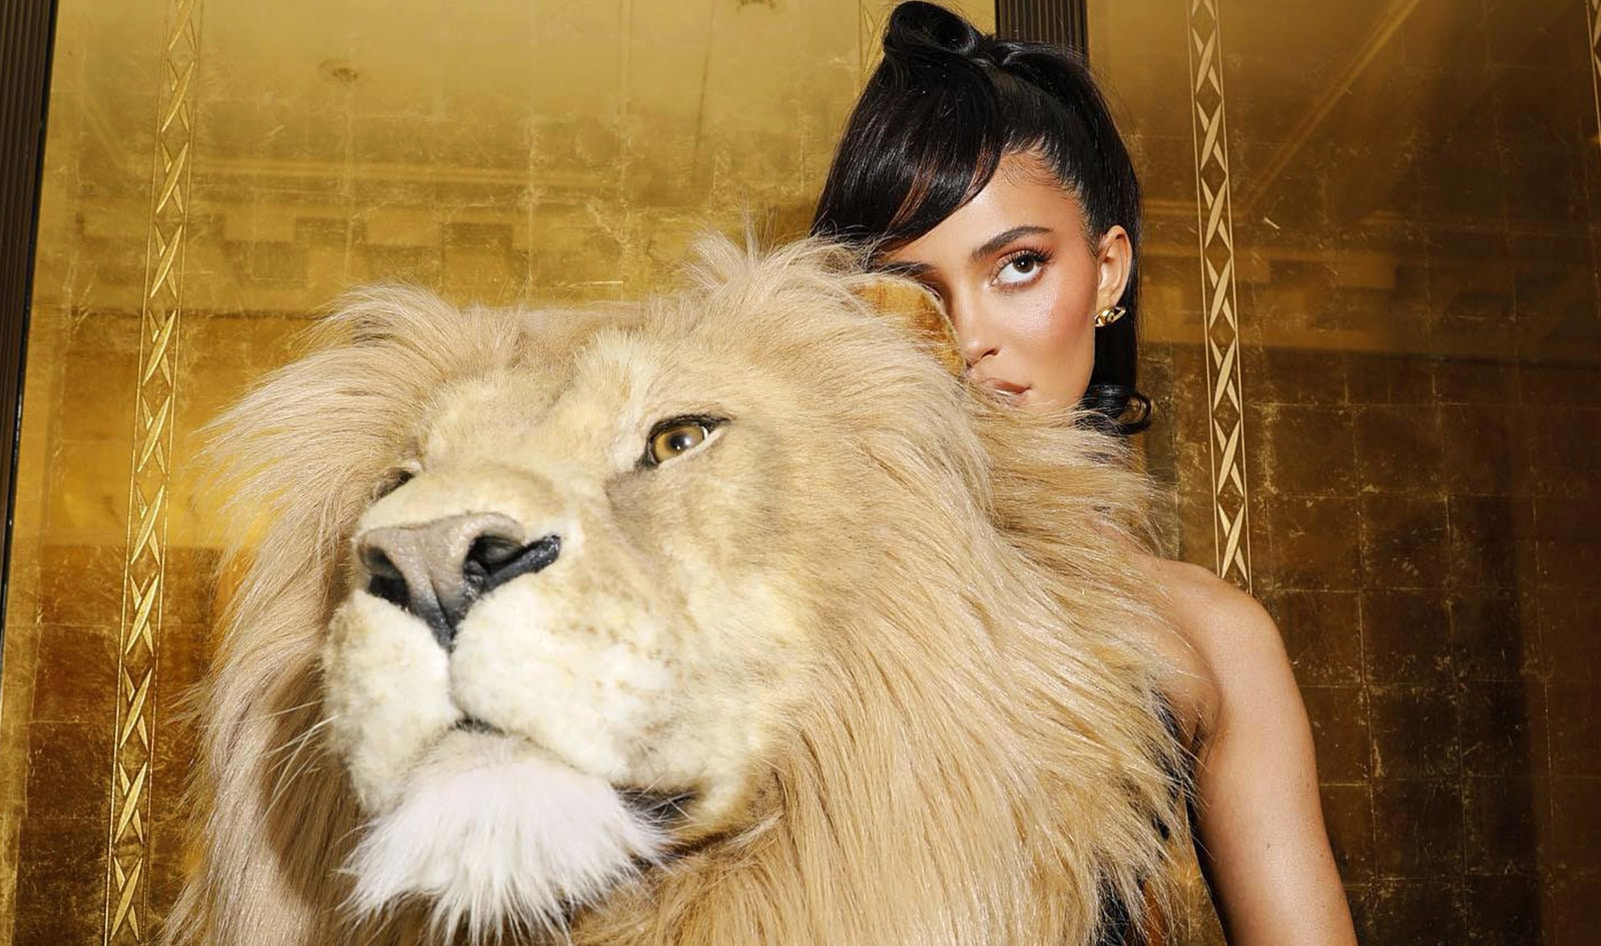 Kylie Jenner Thinks Wearing a Lion's Head Is “Beautiful.” Her Fans  Disagree. | VegNews